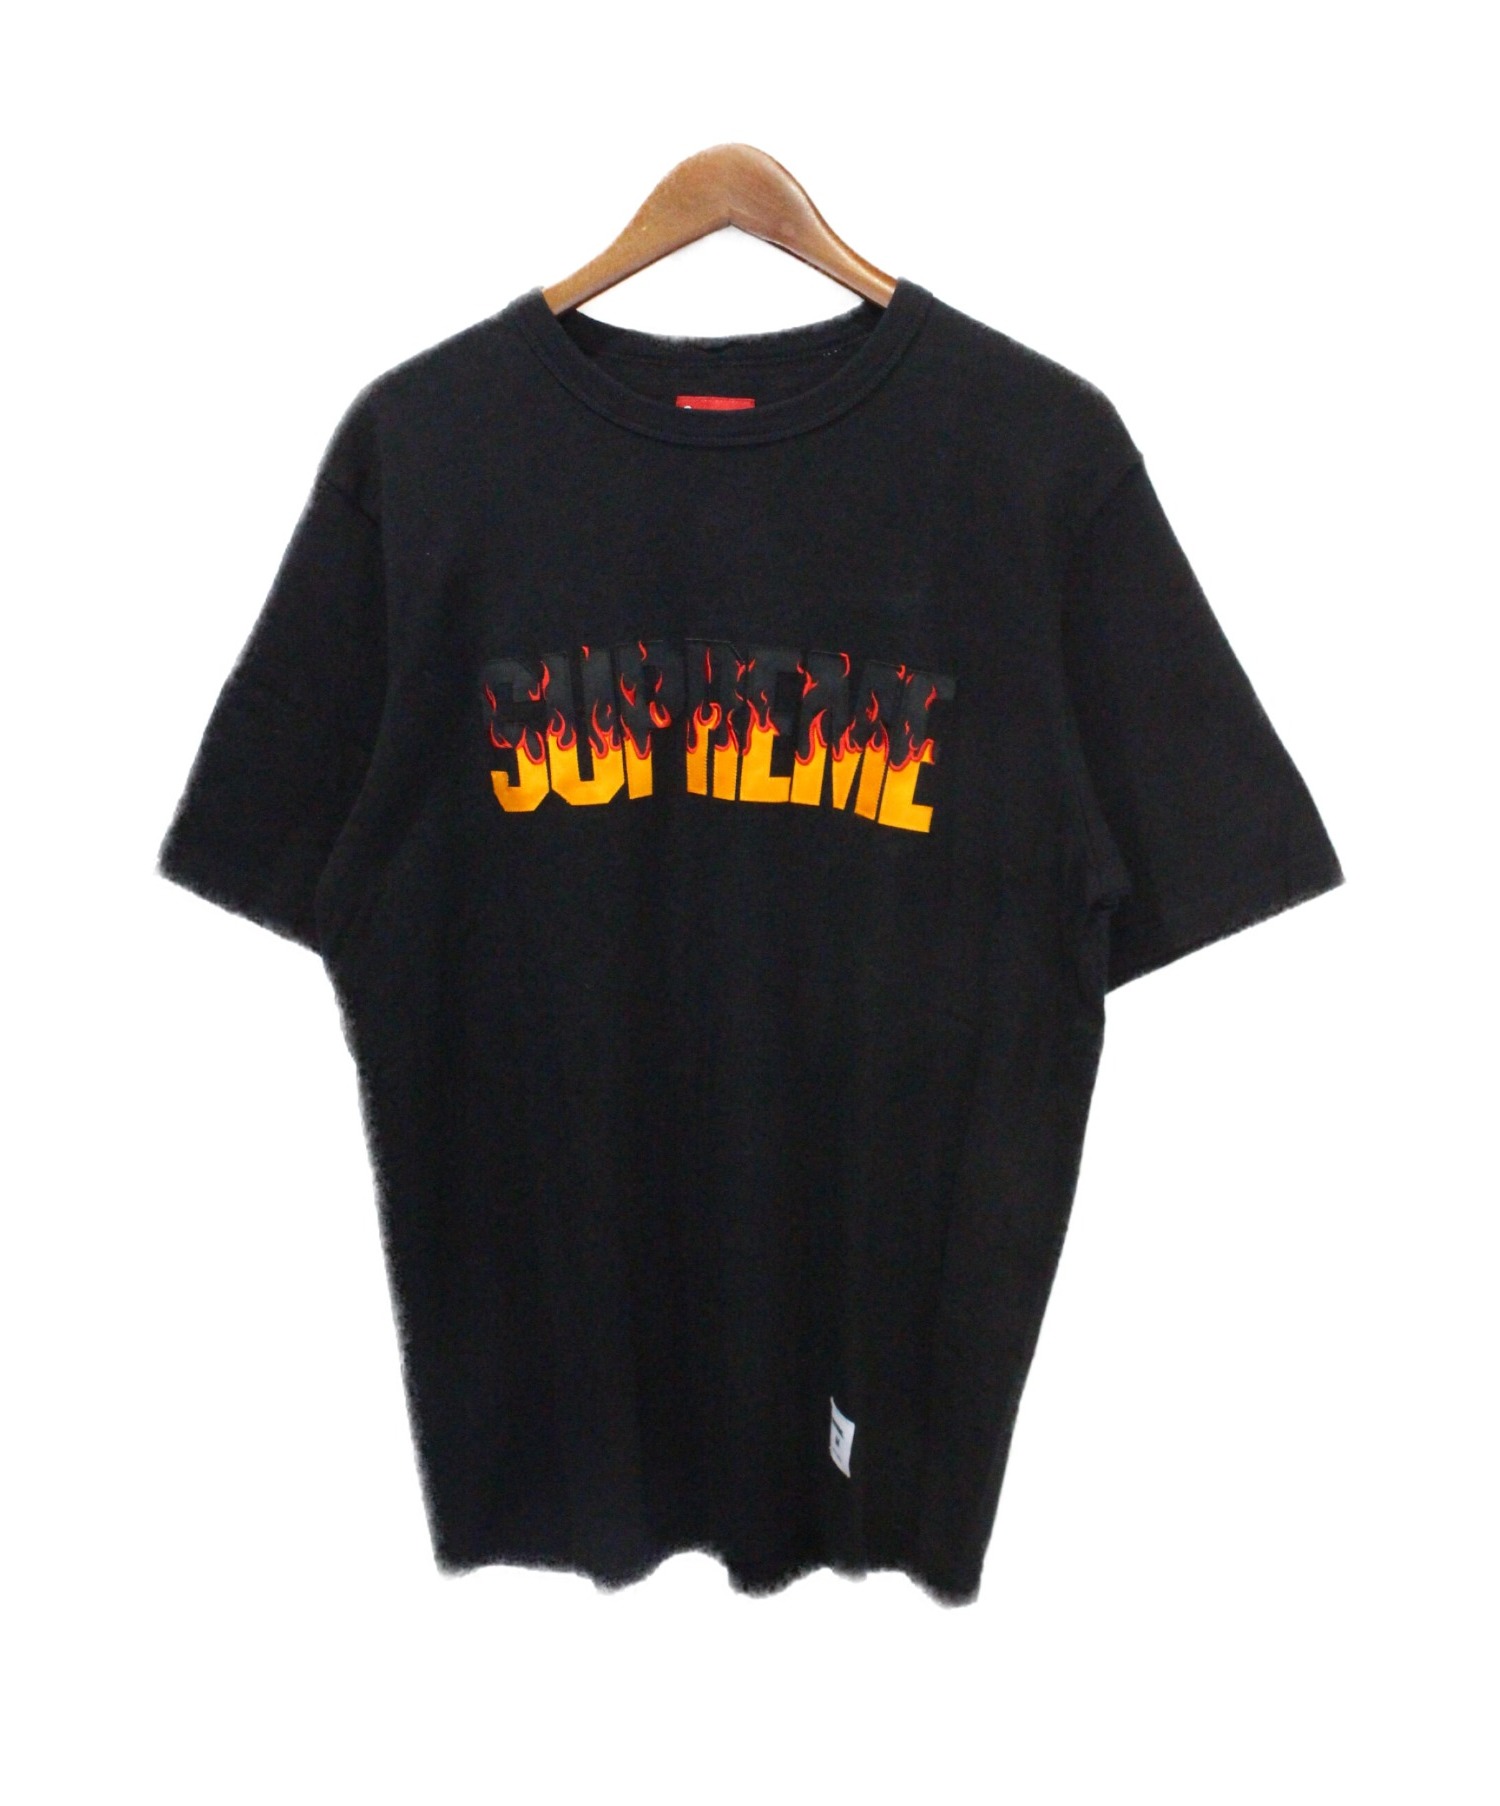 Flame S/S Top 黒 Lサイズ supreme 19aw